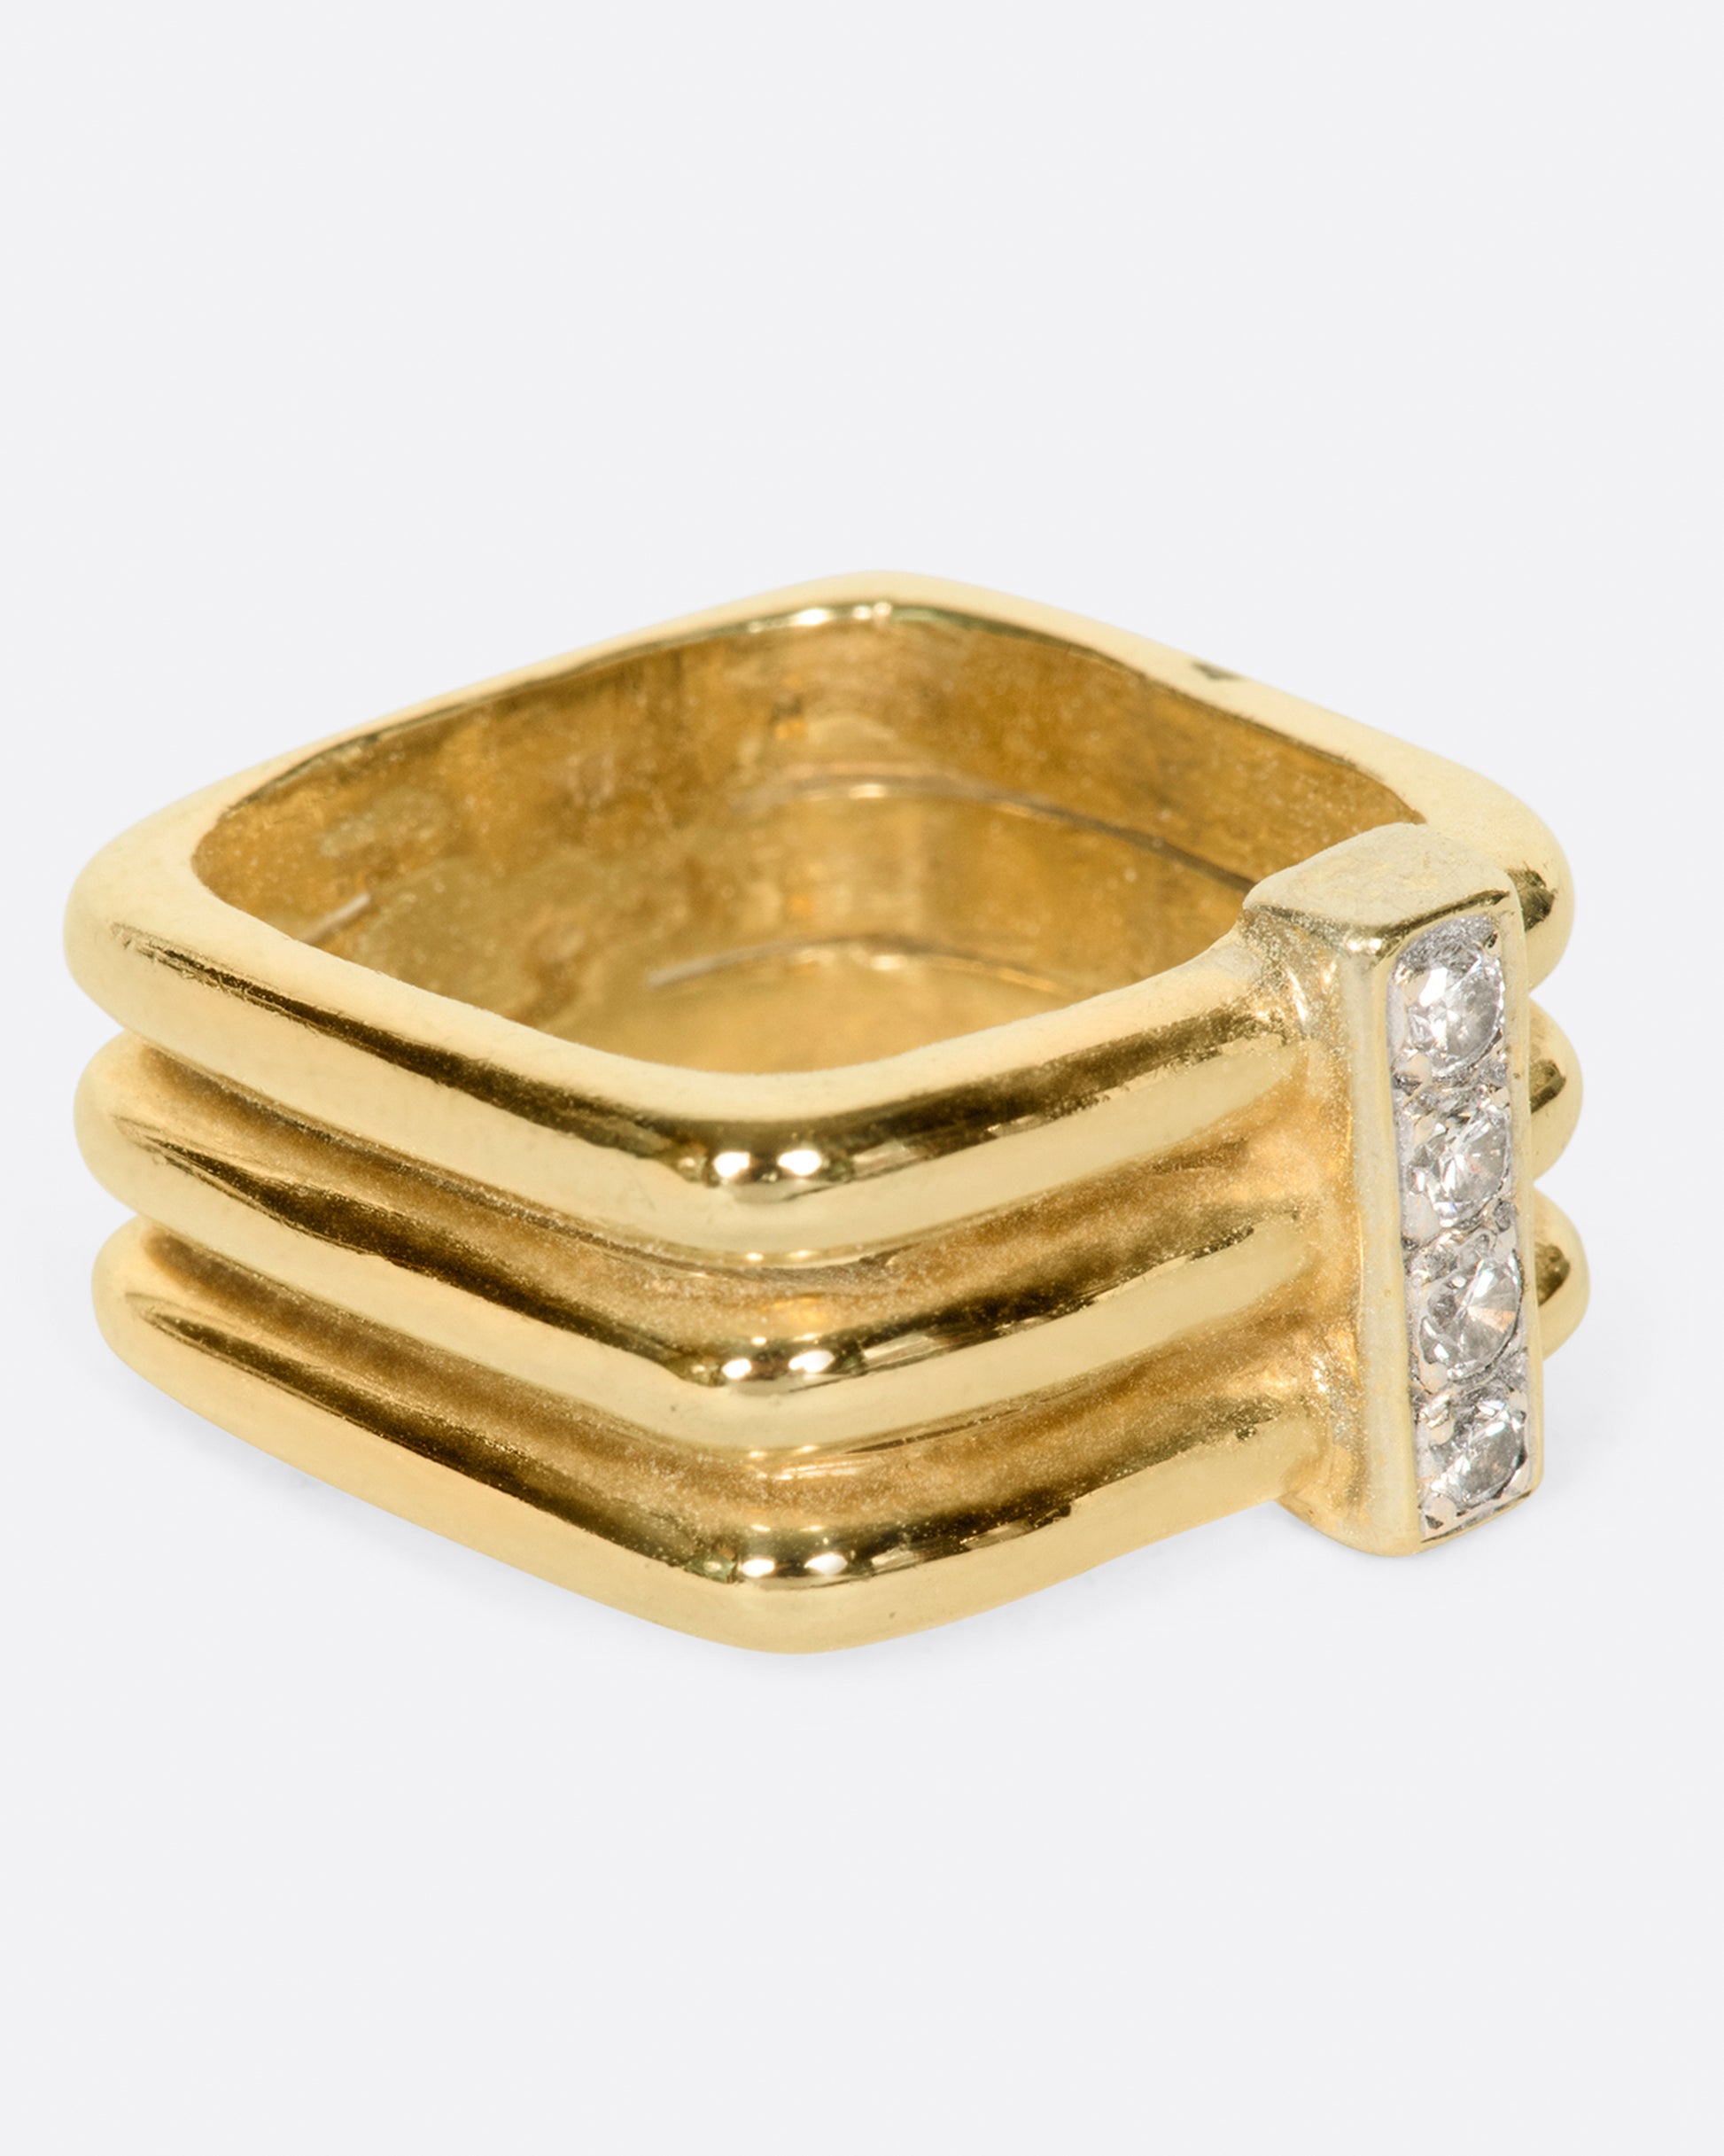 A single band that gives the illusion of a stack, connected with diamonds, shown from the side.